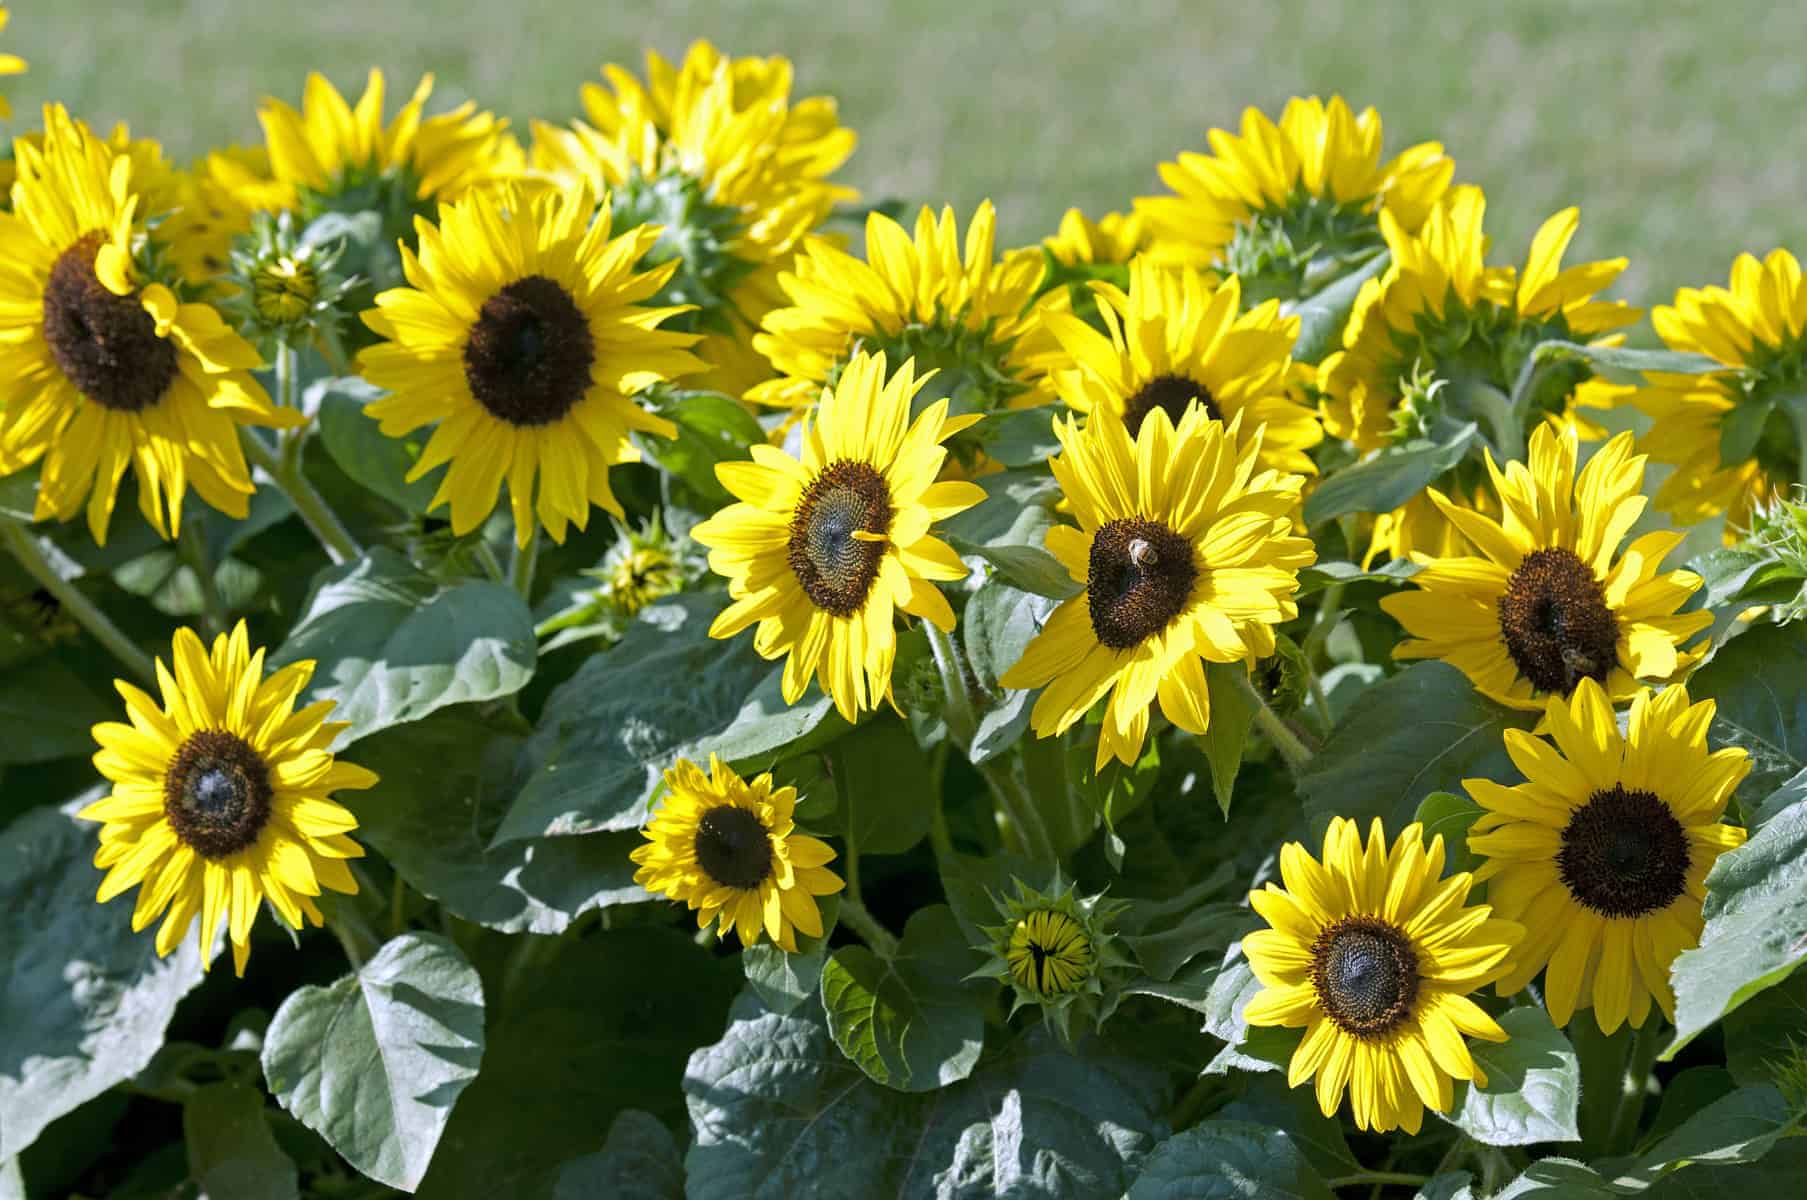 Sunflower Suntastic Yellow With Black Center F1 All America Selections,Studio Apartment Small Apartment Decorating Ideas On A Budget